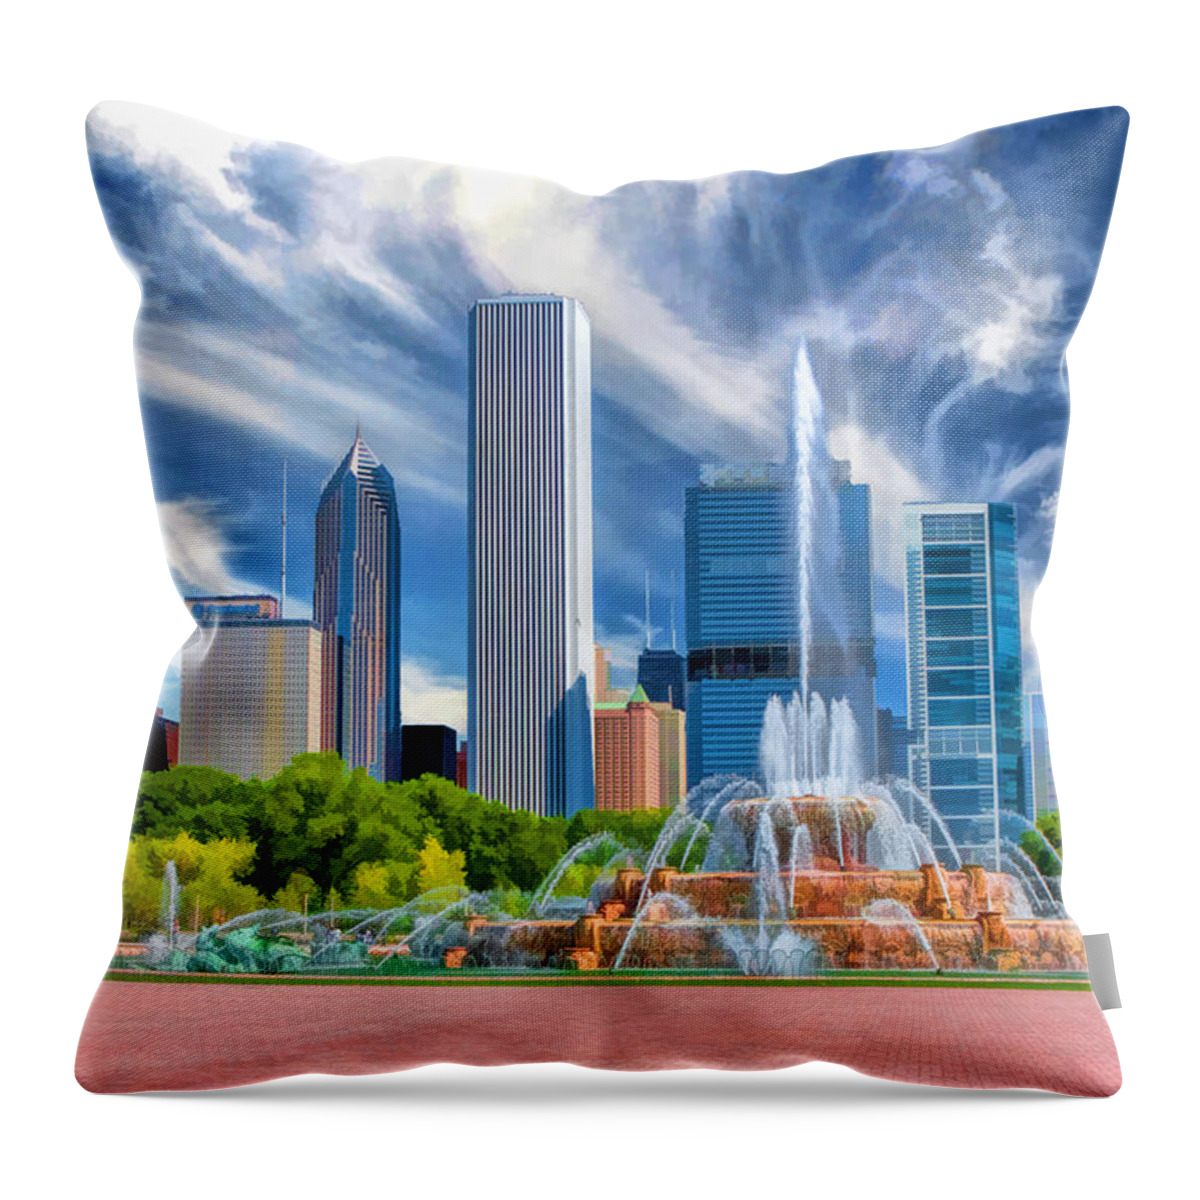 Buckingham Fountain Throw Pillow featuring the photograph Buckingham Fountain Chicago Skyscrapers by Christopher Arndt